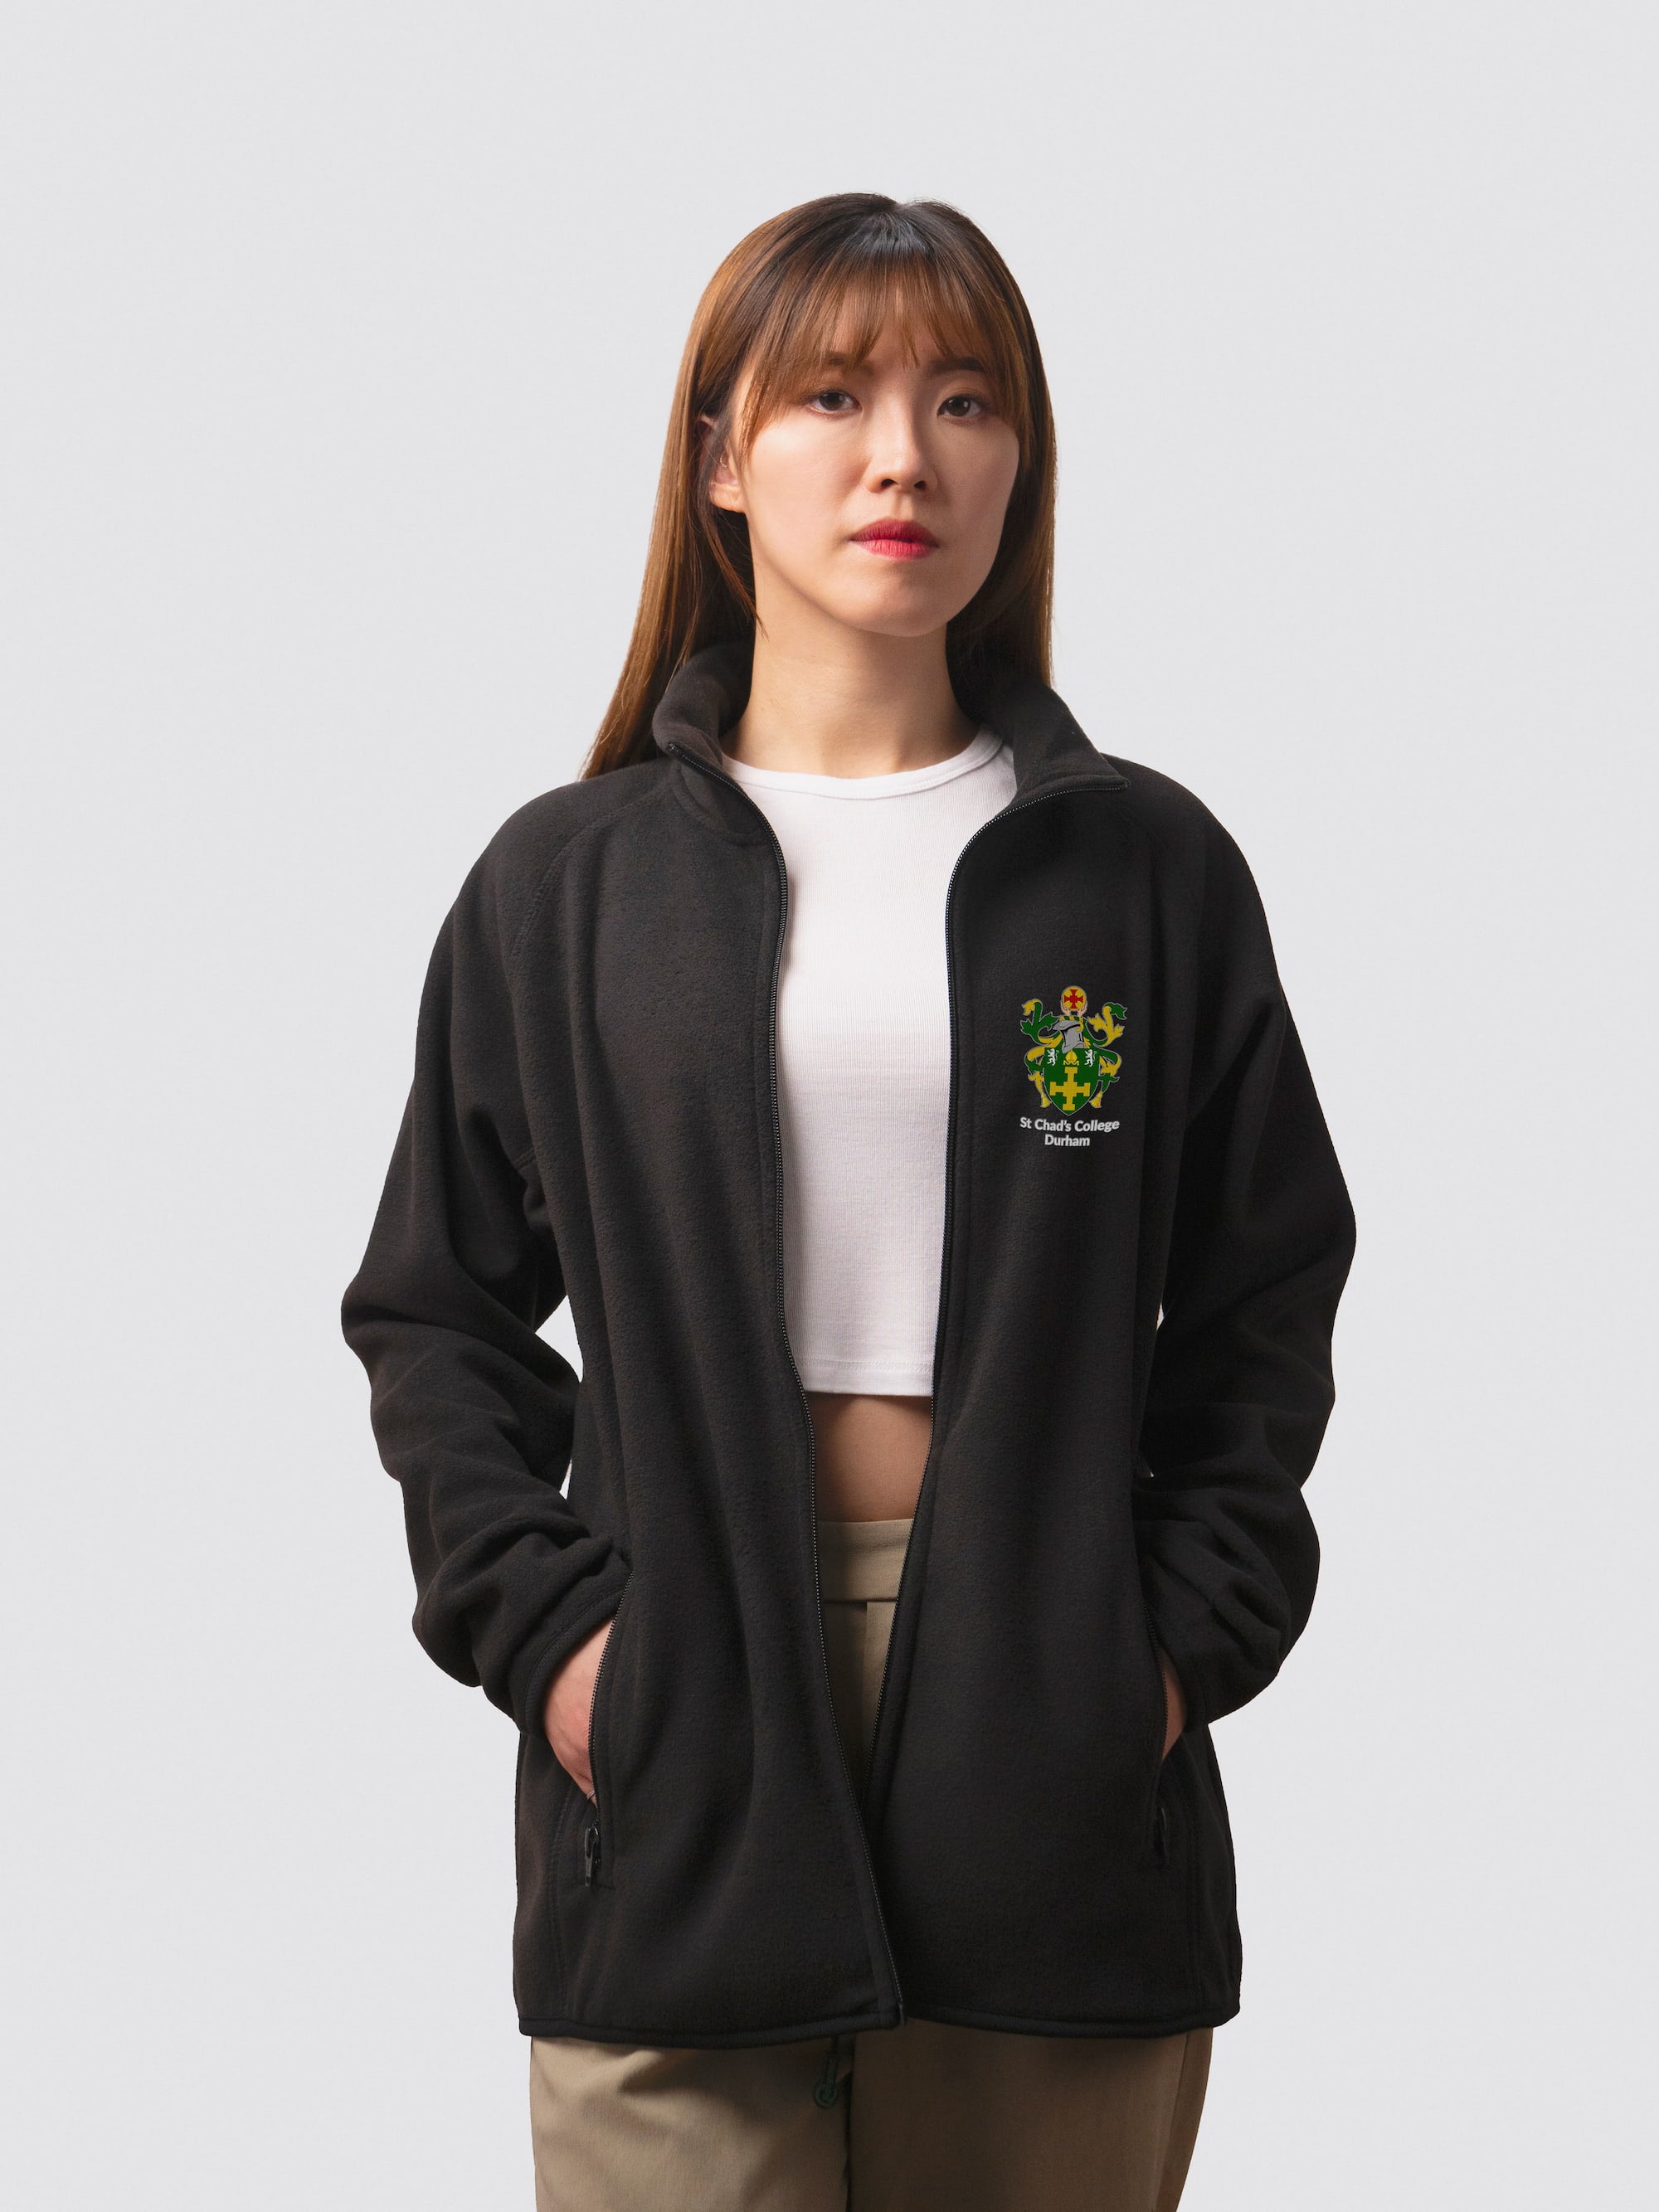 Custom student fleece, with St Chad's crest on the left chest